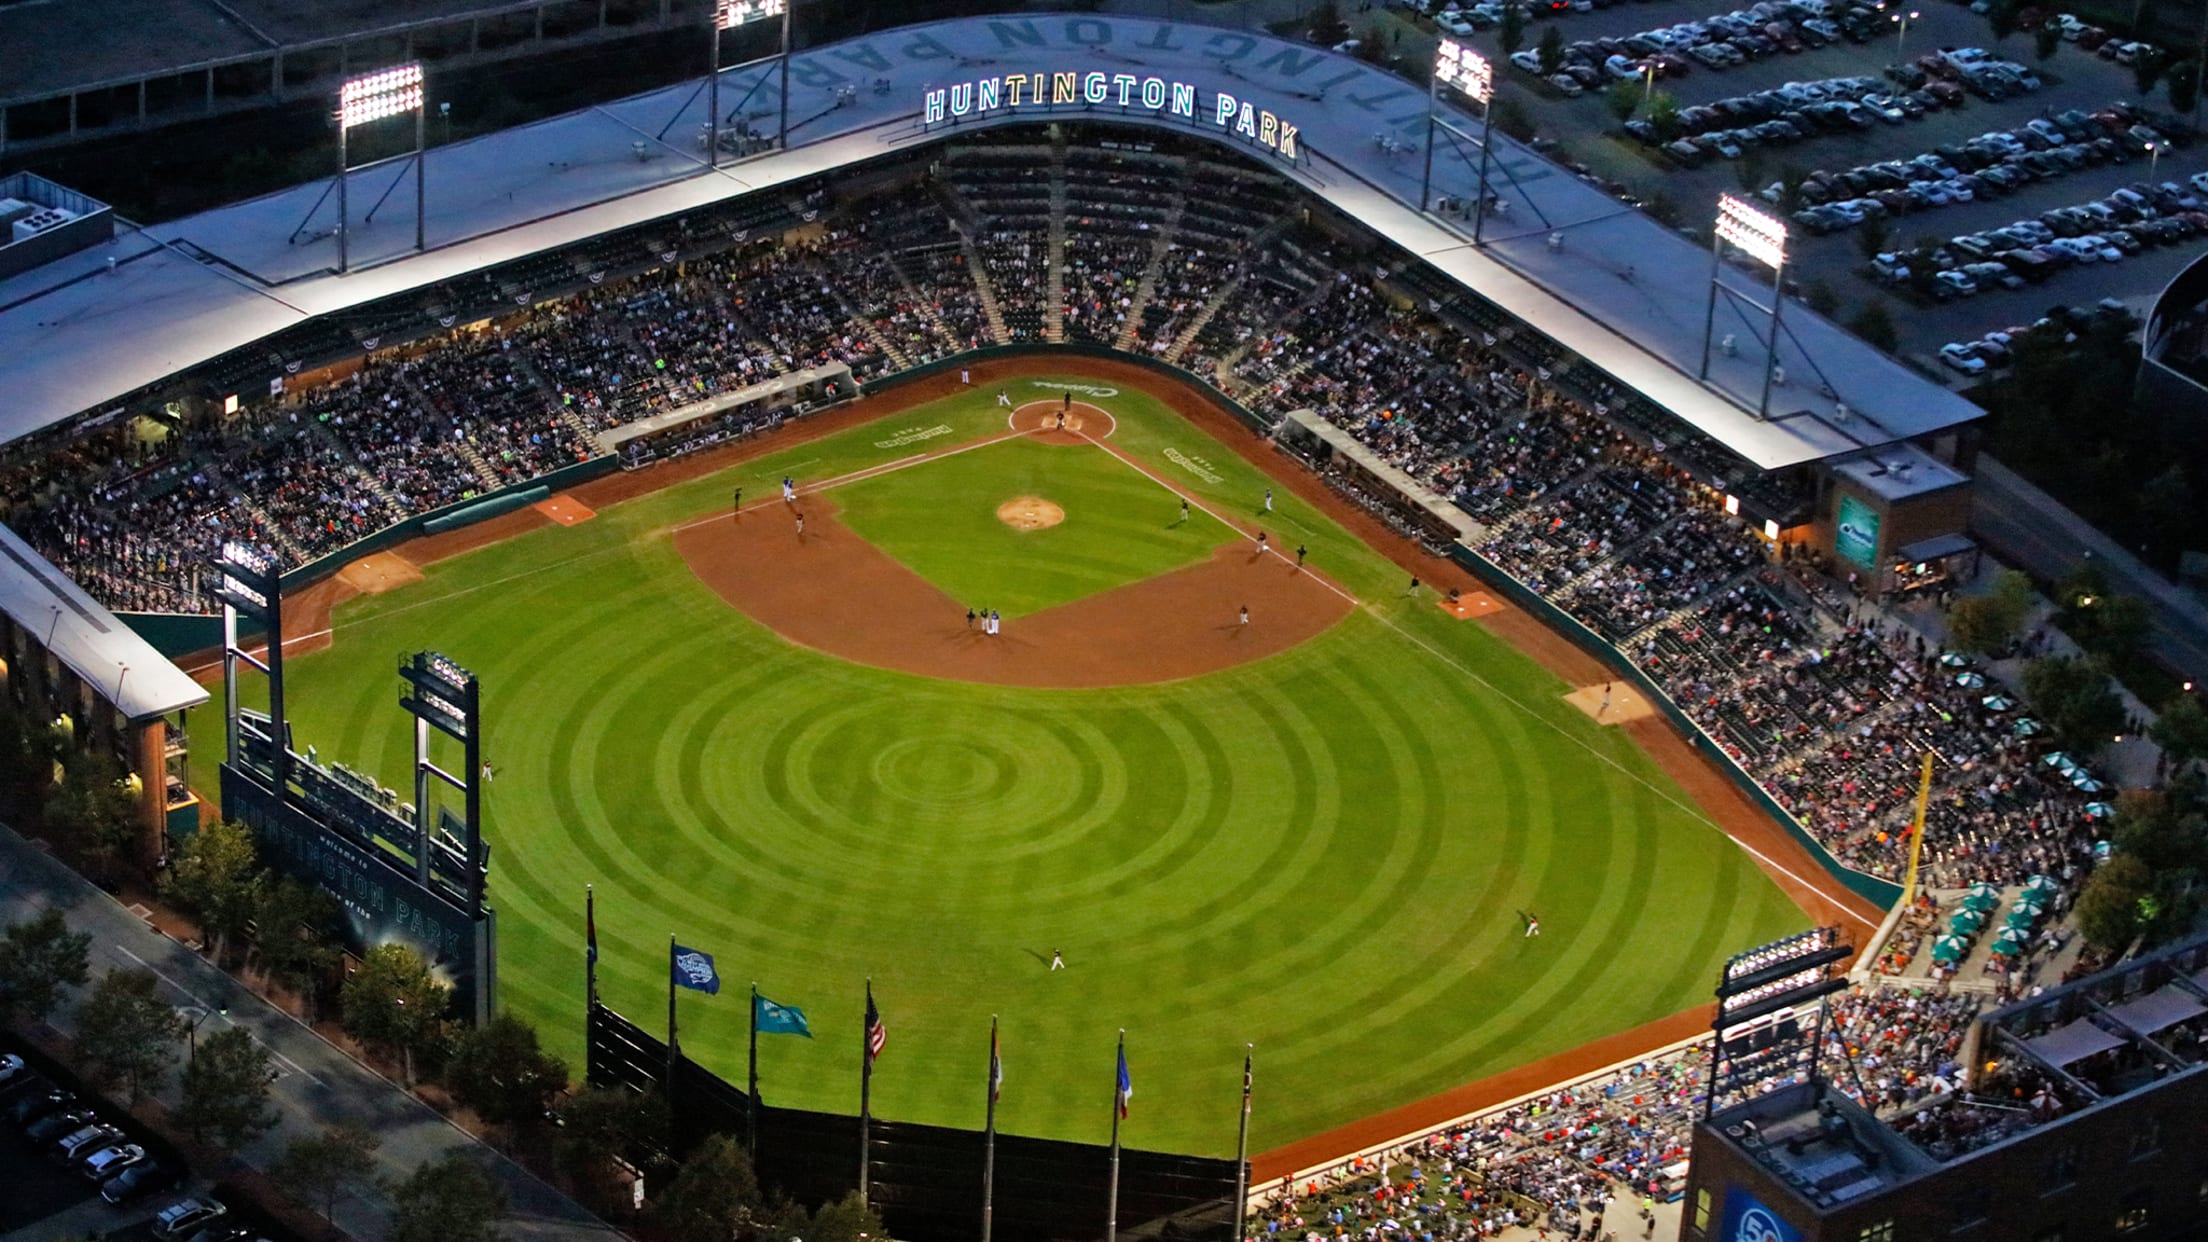 Explore Huntington Park, home of the Columbus Clippers MLB